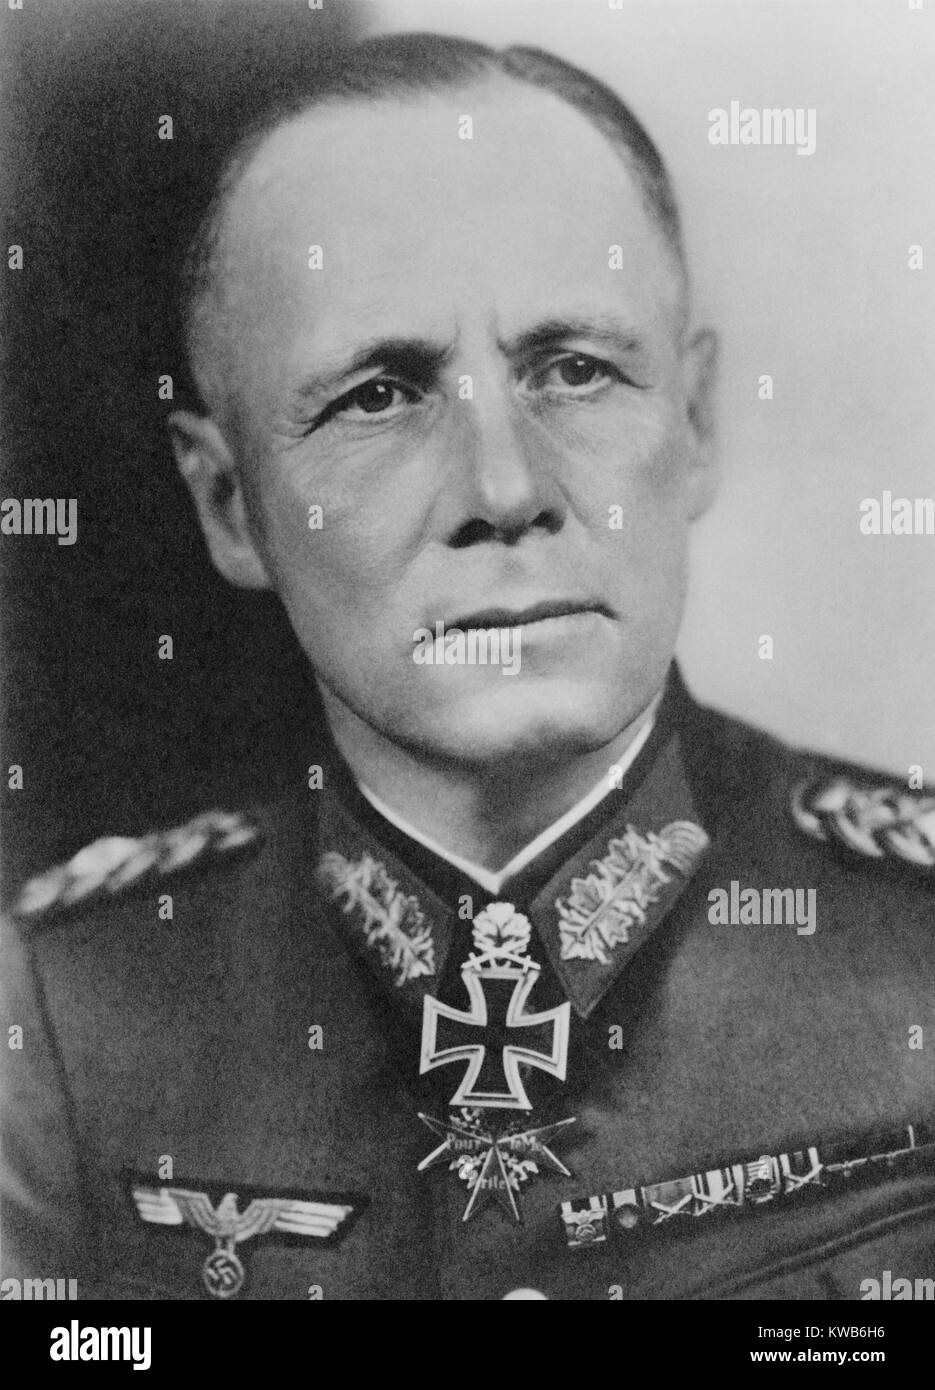 Field Marshall Erwin Rommel, German commander in France and North Africa during World War 2. Rommel had been part of Hitler's circle in 1938-39, but was never a member of the Nazi Party. Ca. 1940-44. (BSLOC 2014 8 158) Stock Photo